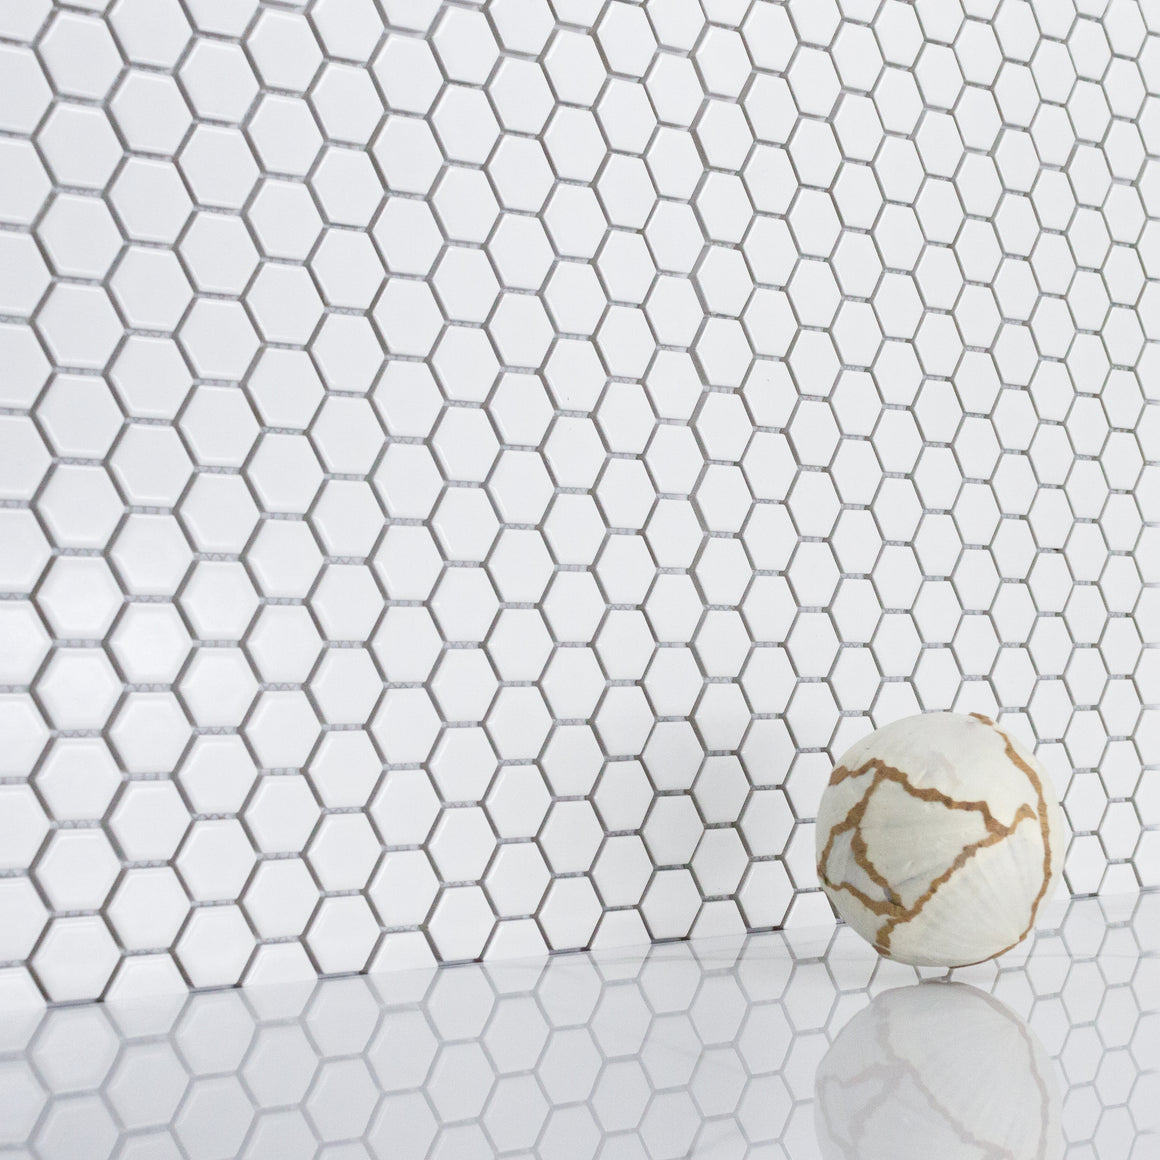 Hexa-Dot 1" Hexagon White modern matte porcelain mosaic for residential and commercial bathroom and kitchen floor and wall imported from China, Anatolia available from TilesInspired Canada's Online Tile Store delivering across Ontario and Quebec, including Toronto, Montreal, Ottawa, London, Windsor, Kitchener, Muskoka, Barrie, Kingston, Hamilton, and Niagara decoration idea